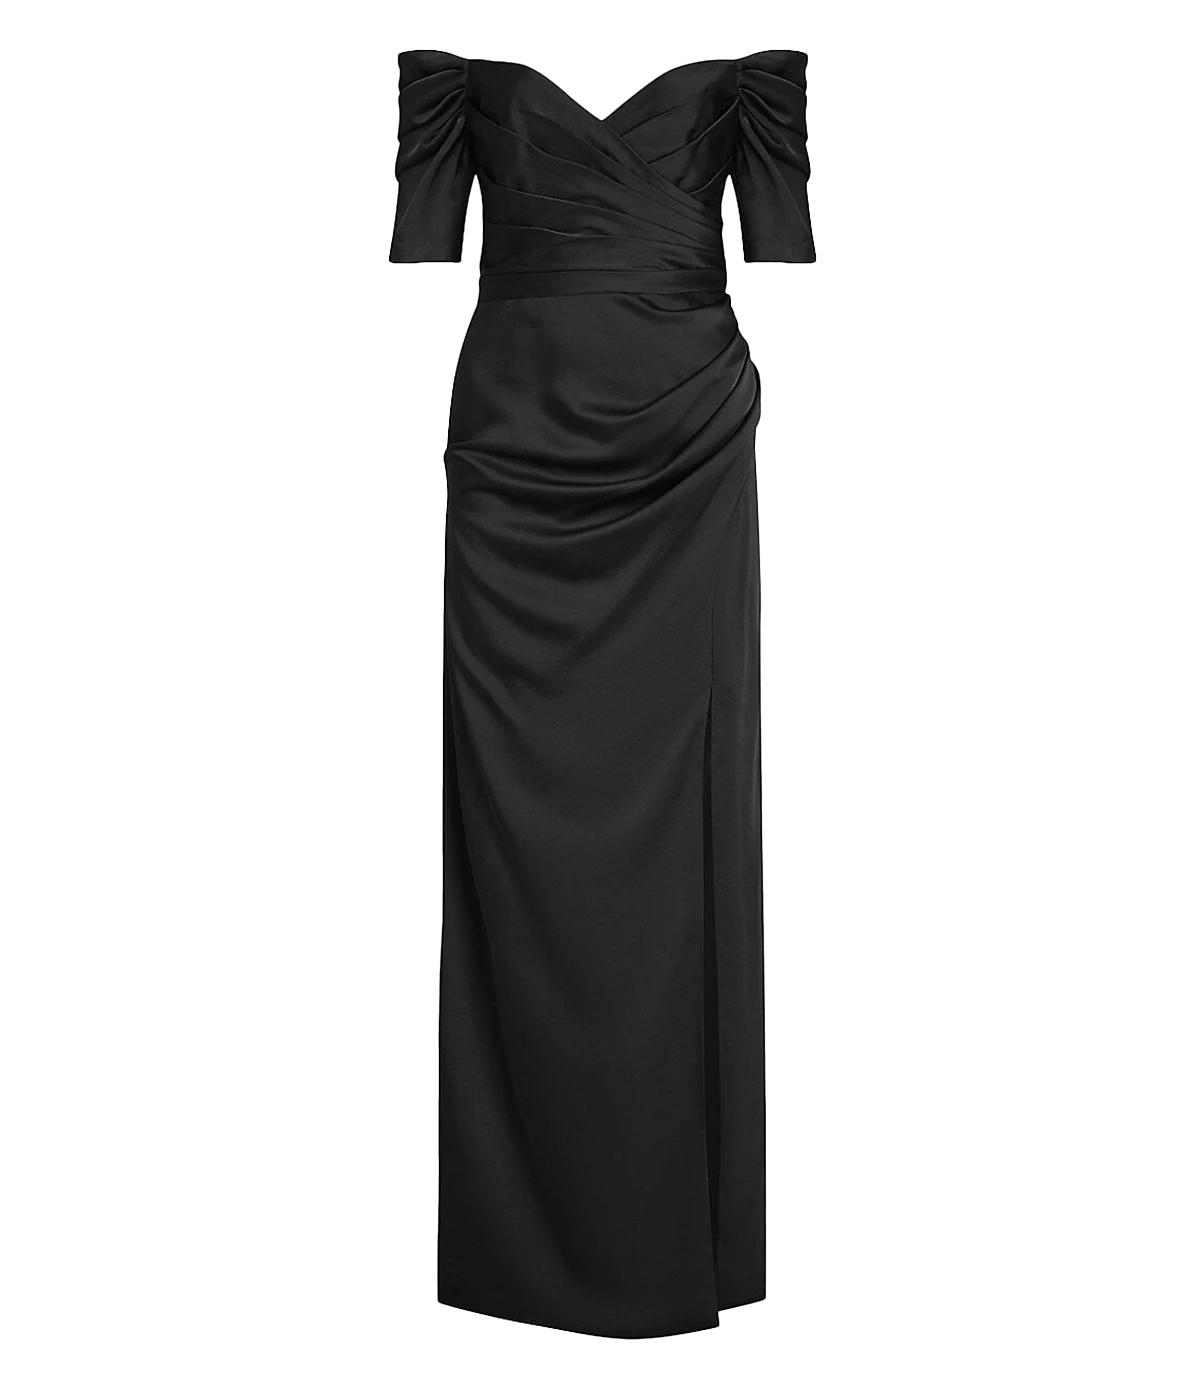  An off the shoulder elevated evening dress, in a black silky fabric, fitted bodice and floor length skirt with glamourous knee length split and gathered detail. Evening dress, formal dress, black tie attire, made in USA, bra friendly, comfortable. 